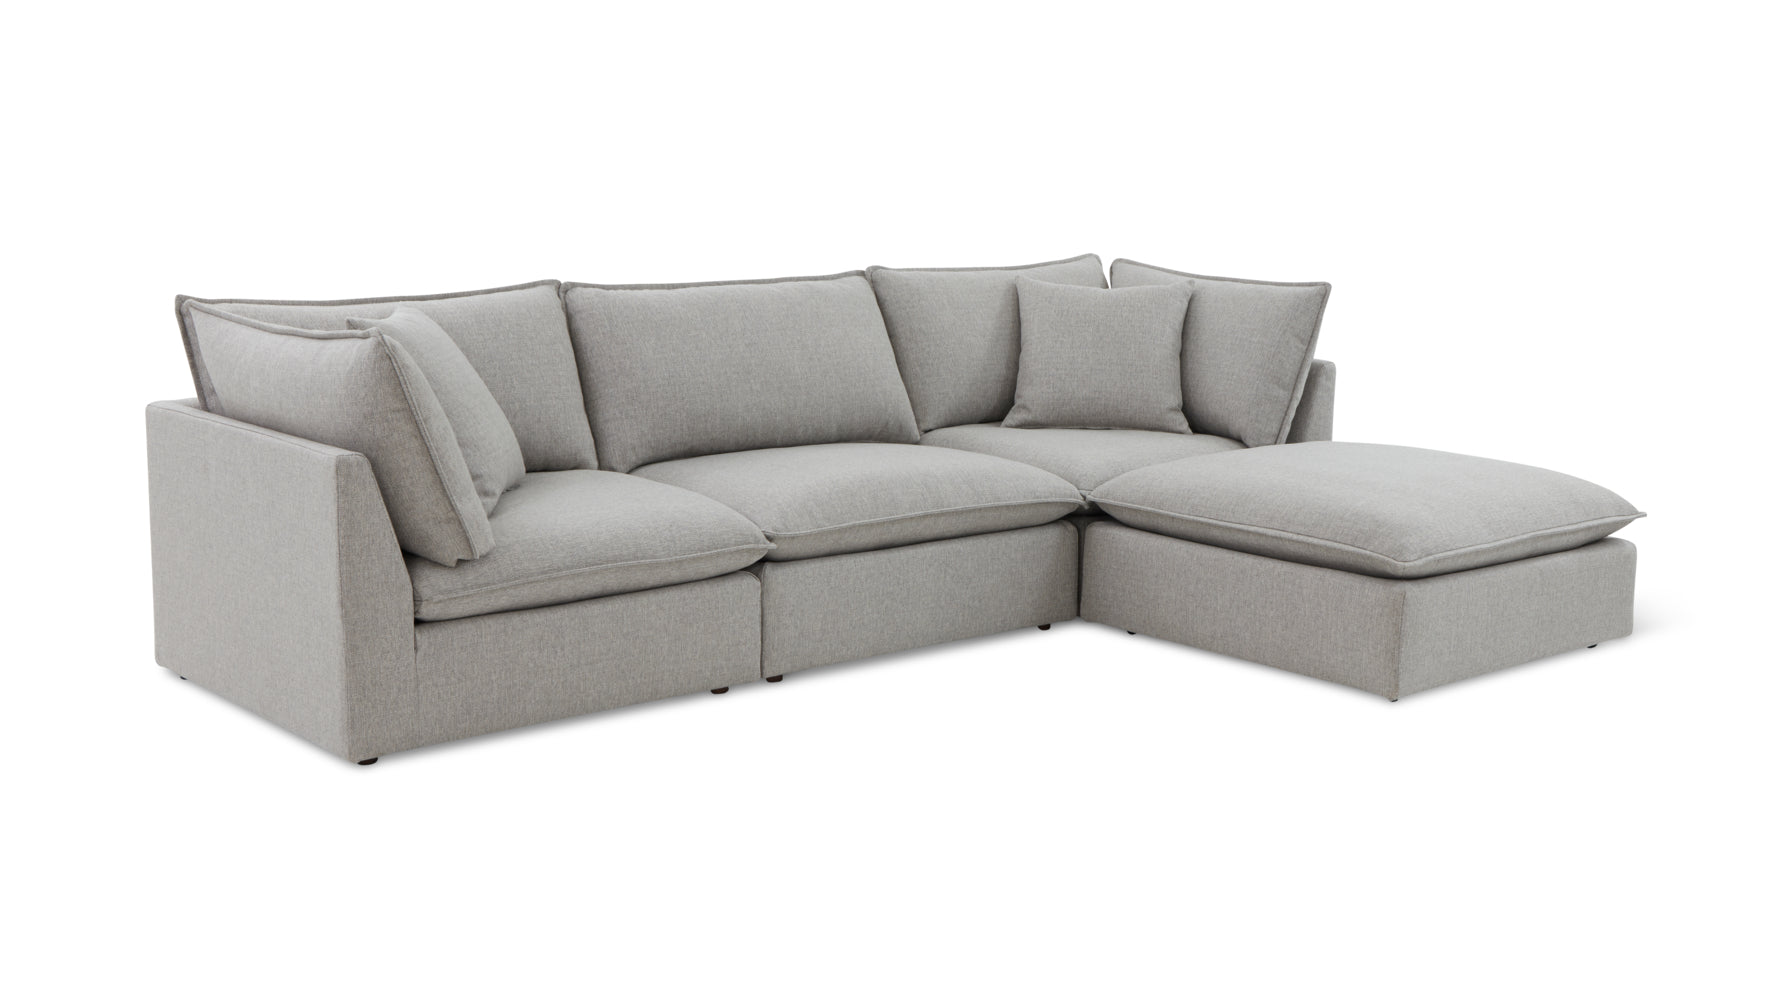 Chill Time 4-Piece Modular Sectional, Heather - Image 2